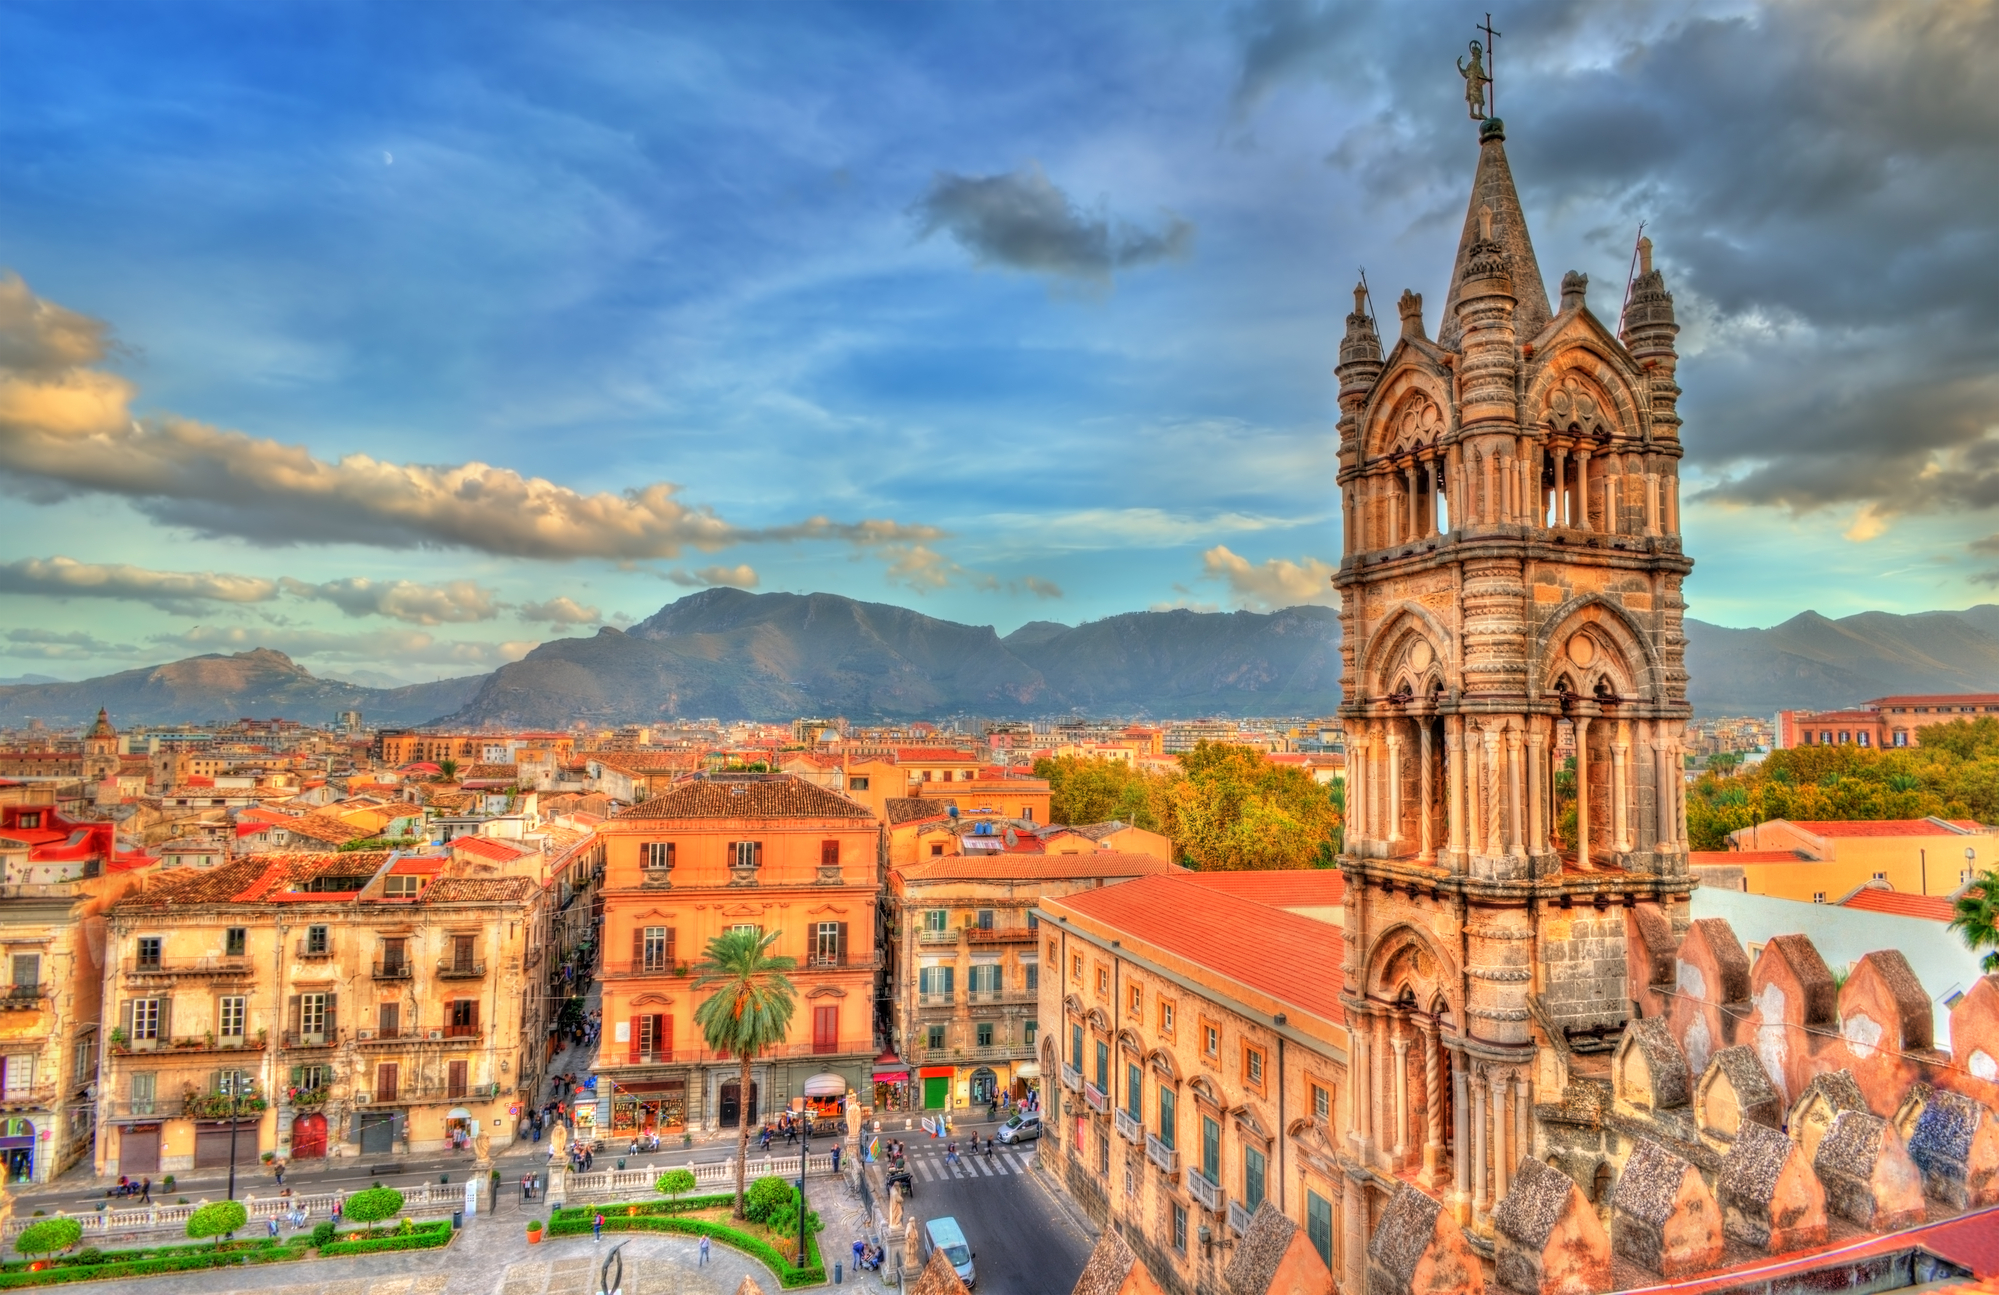 Tower of Palermo Cathedral at sunset. A UNESCO heritage site in Sicily, Italy